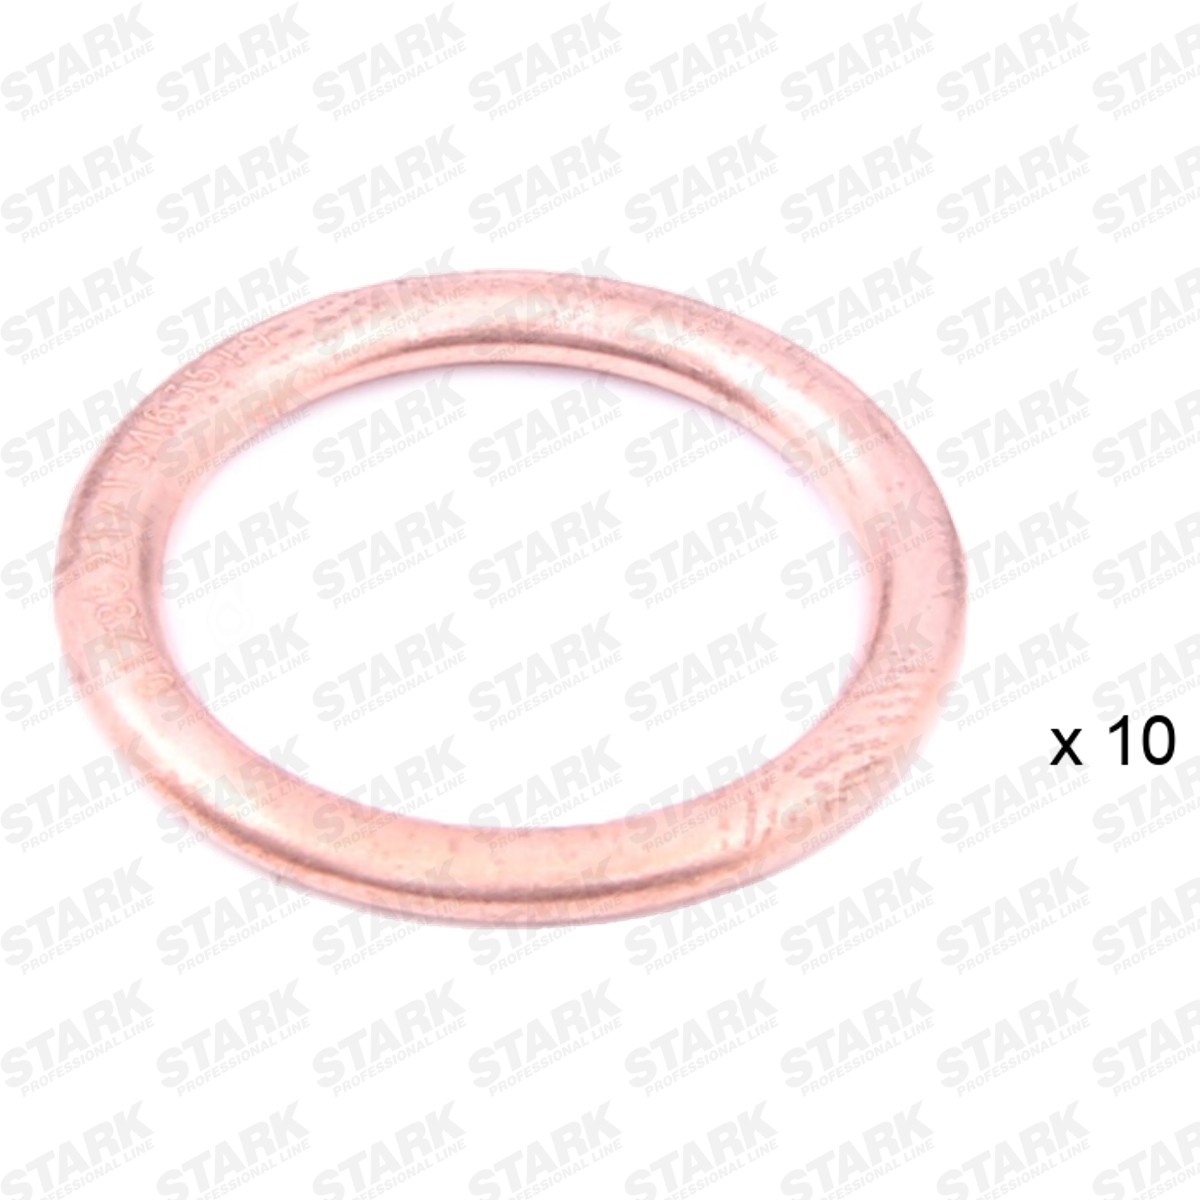 Mercedes-Benz MARCO POLO Fastener parts - Seal Ring STARK SKSRI-3650133